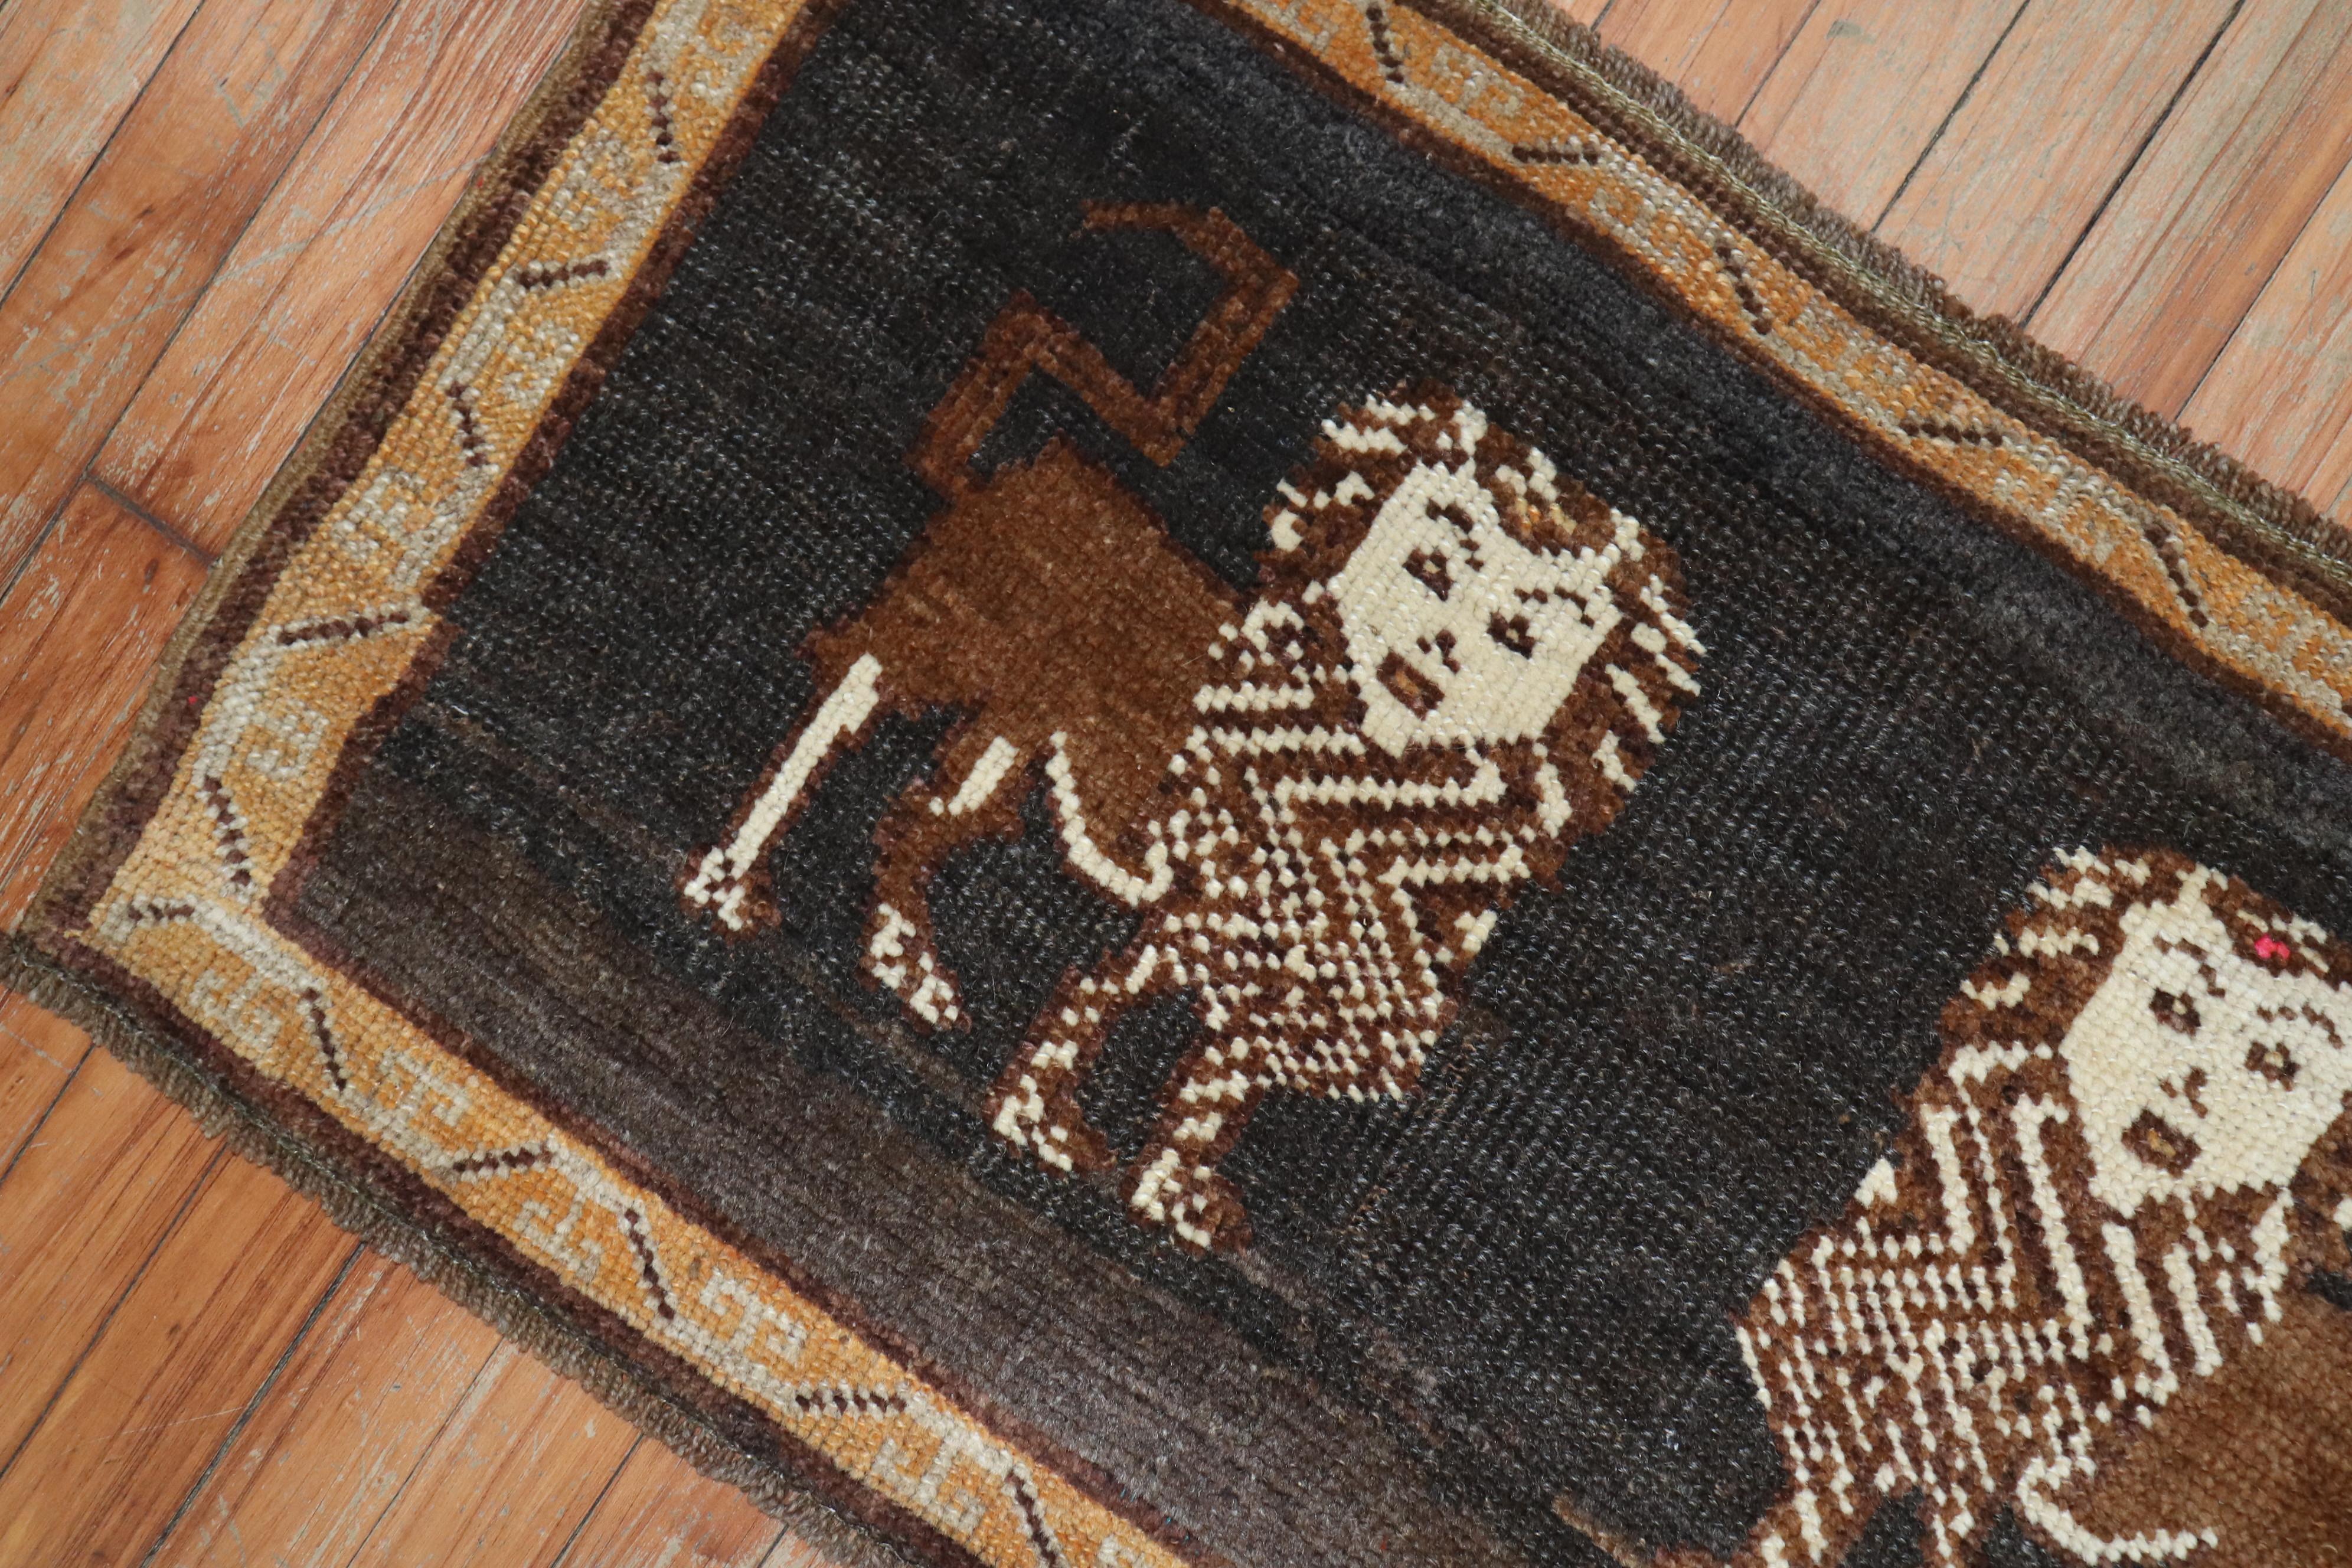 A mid 20th century Turkish rug depicting 2 brown lions on a black/charcoal colored ground.

Measures: 1'10